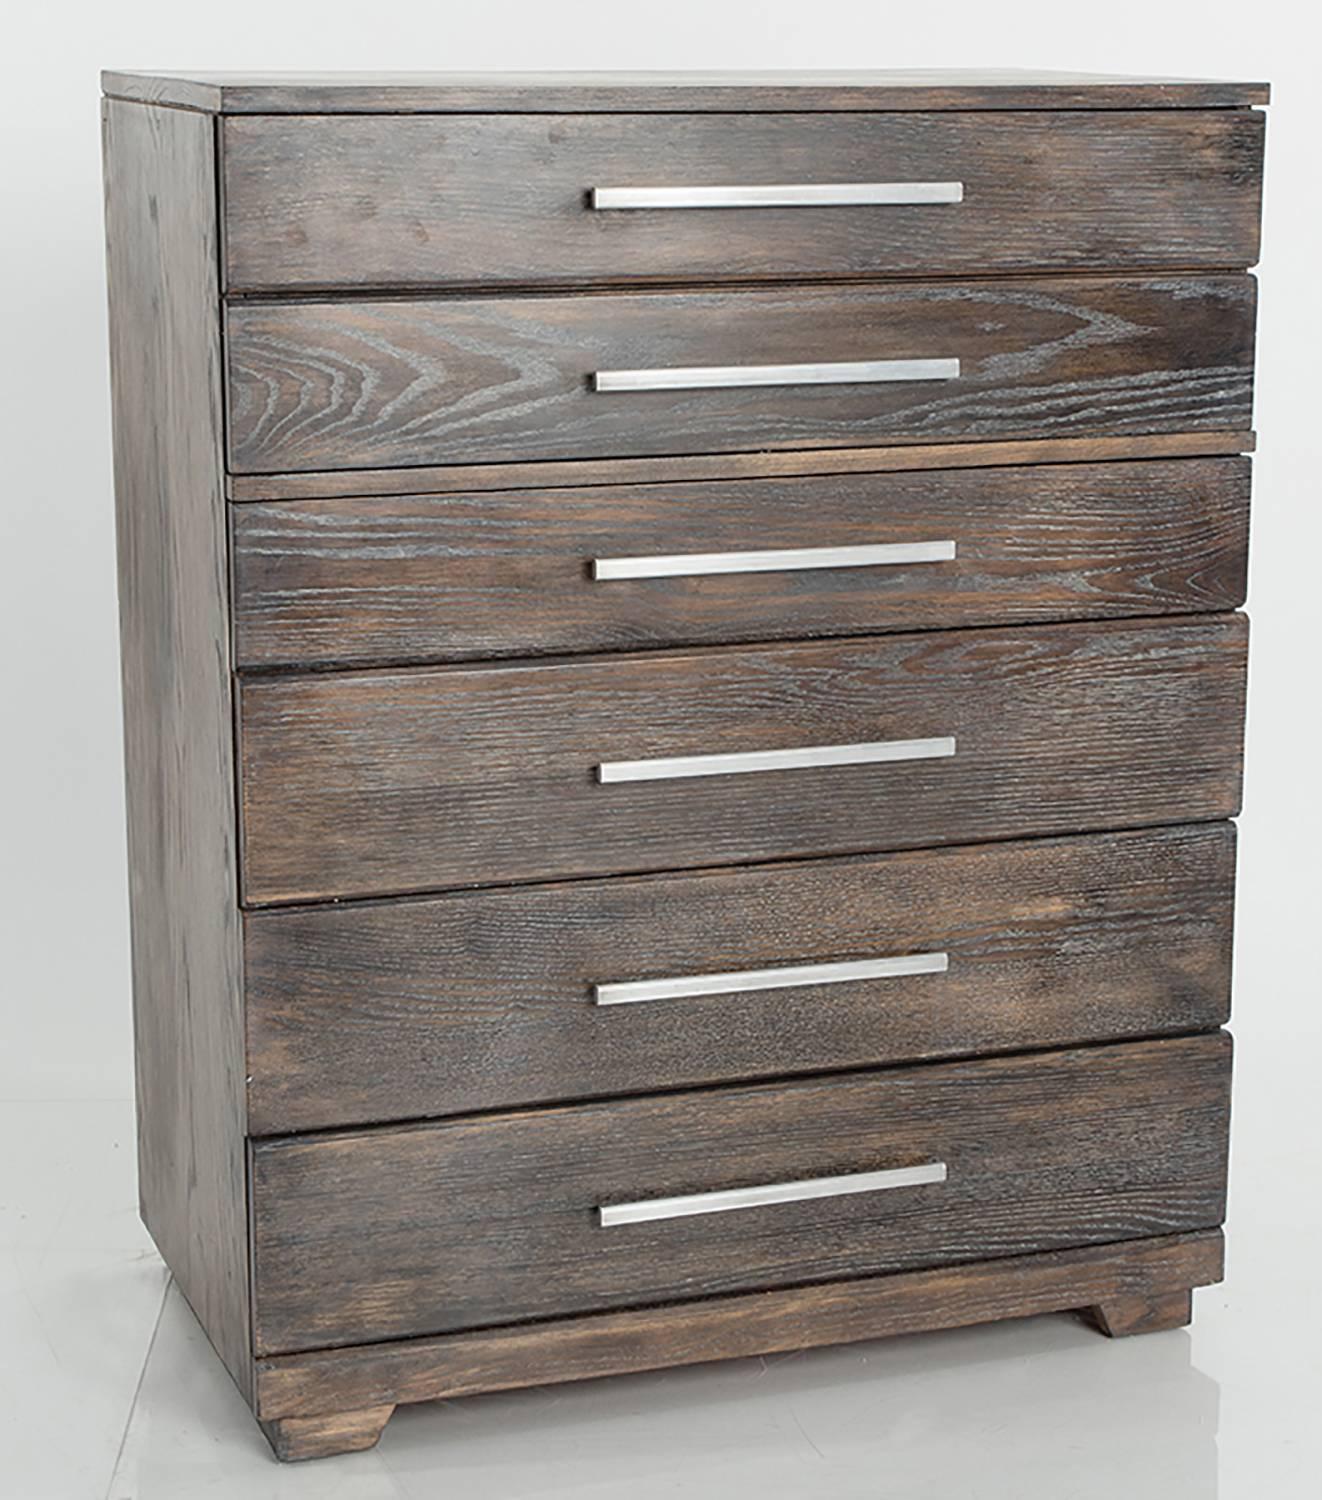 Sleek six-drawer chest in a chocolate brown cerused finish by Raymond Lowey for Mengel Furniture CoSleek 6 drawer chest in a chocolate brown cerused finish by Raymond Lowey for Mengel Furniture Co.